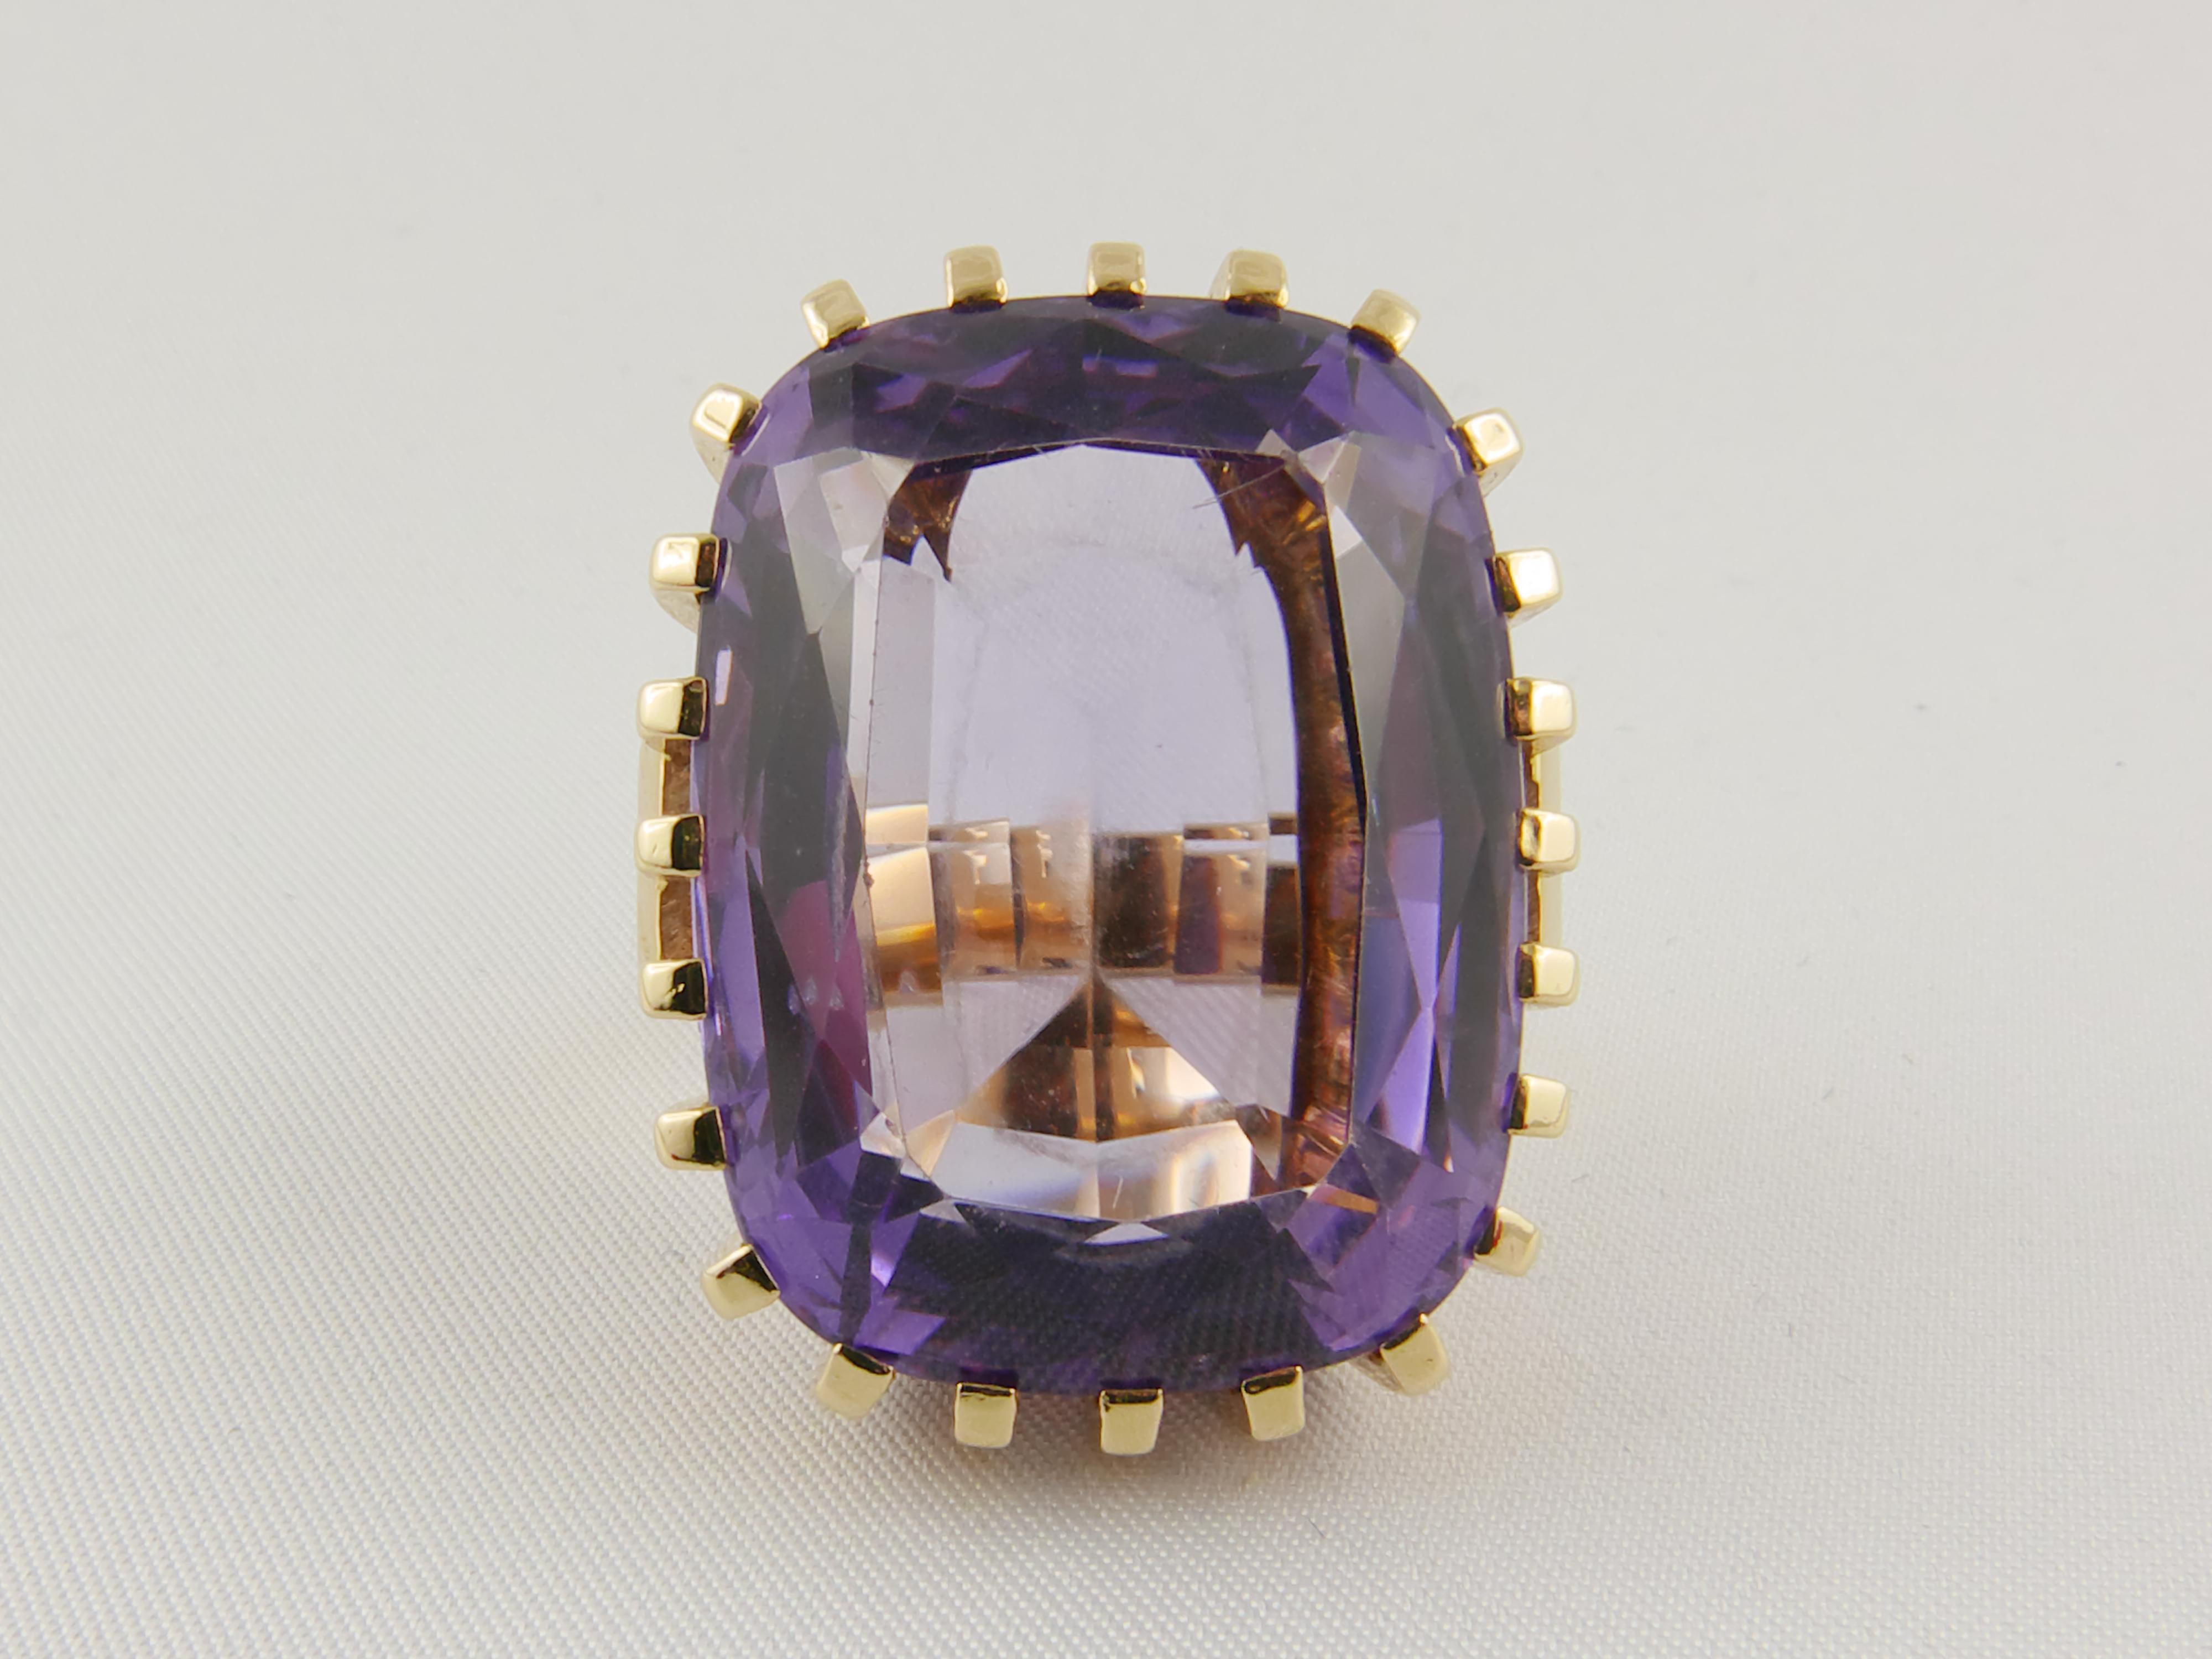 Distintive and imposing 1950s  cocktail Ring finely crafted in 18k Yellow Gold and  featuring a stunning faceted Amethyst.  The design incorporates the setting of the gemstone directly into the rest of the ring using 24 Yellow Gold prongs to hold